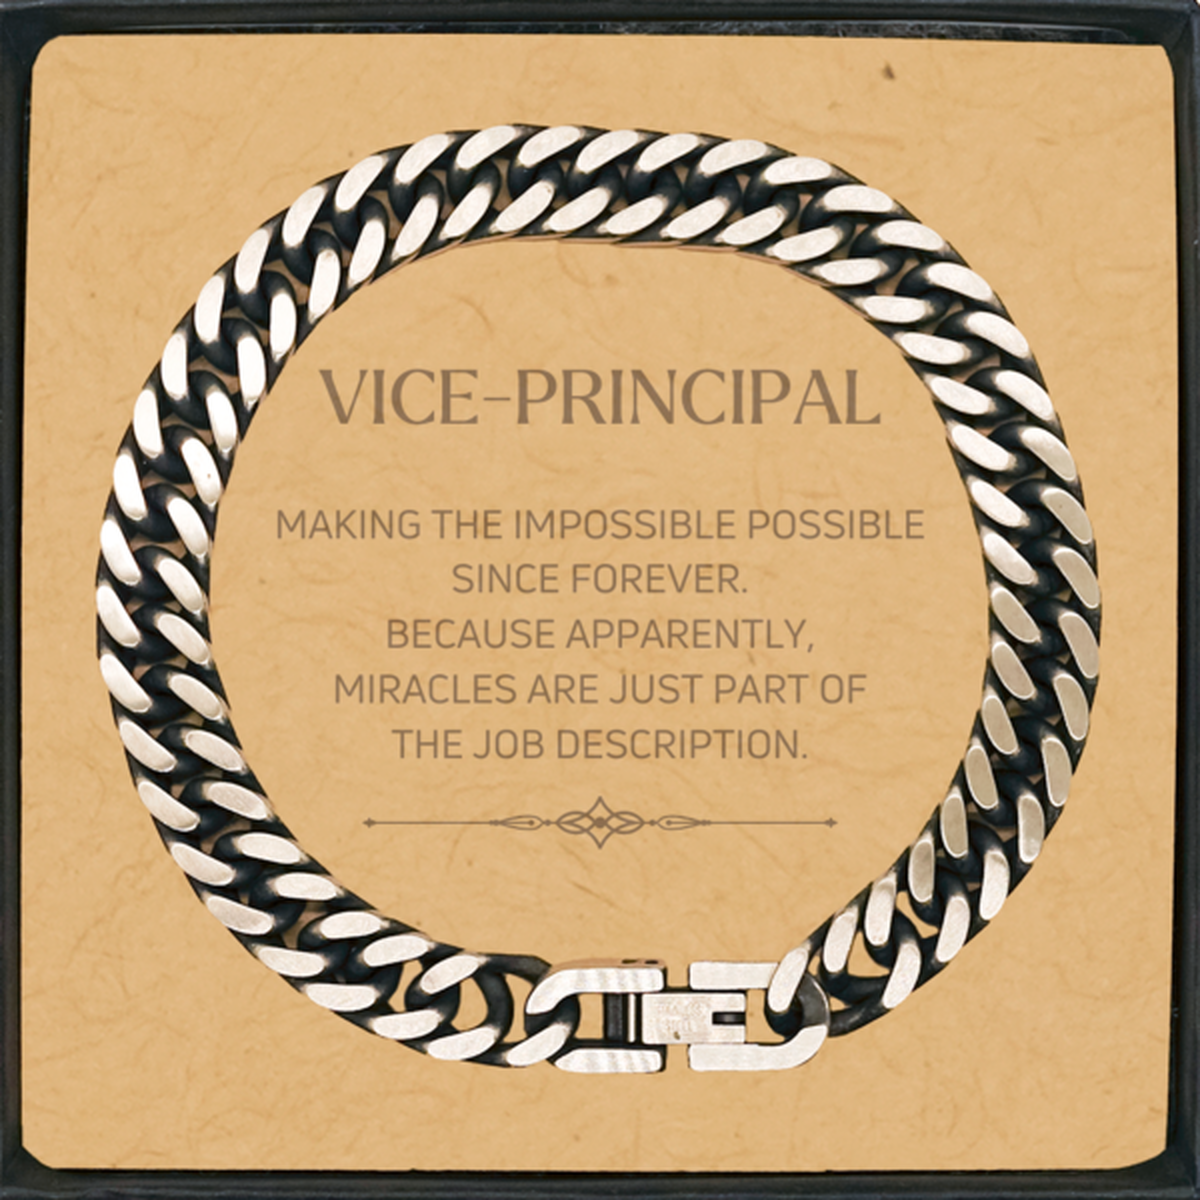 Funny Vice-principal Gifts, Miracles are just part of the job description, Inspirational Birthday Cuban Link Chain Bracelet For Vice-principal, Men, Women, Coworkers, Friends, Boss